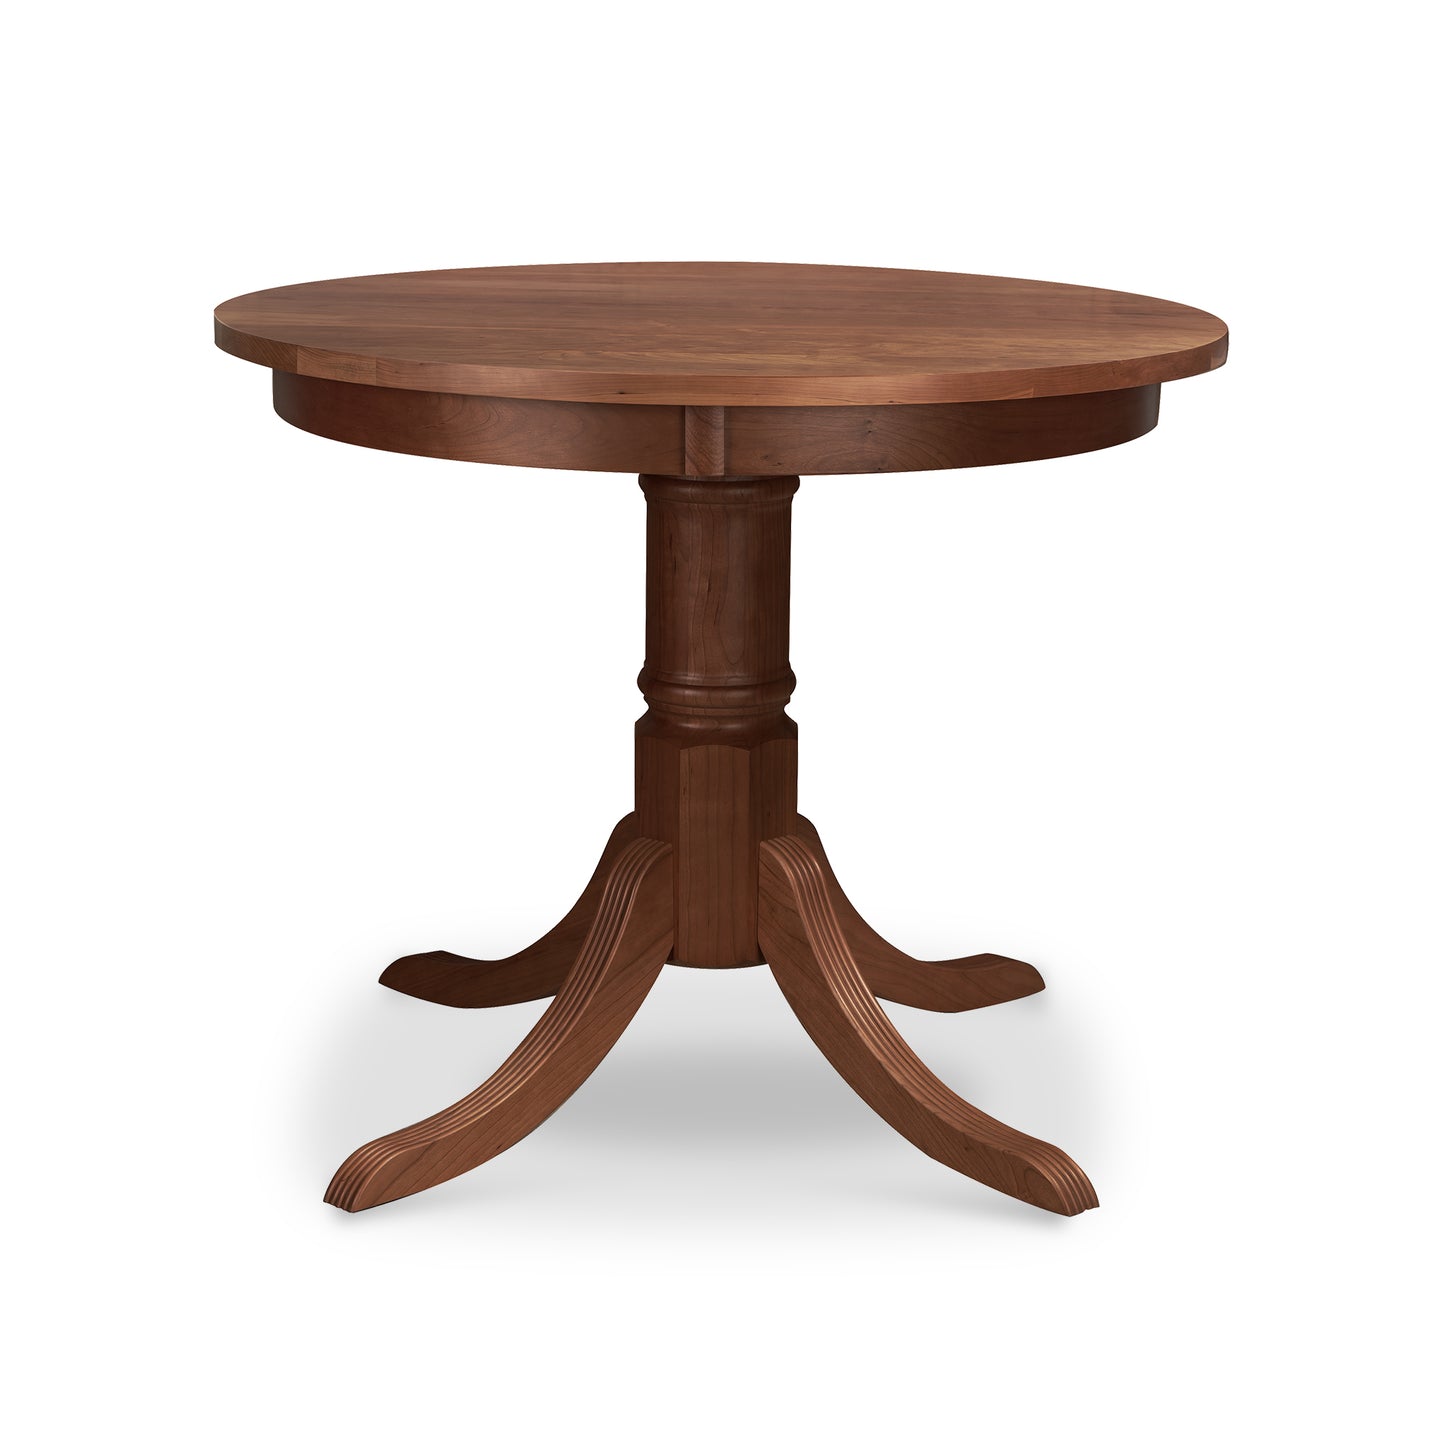 A Duncan-Phyfe Round Pedestal Dining Table from Lyndon Furniture, with a wooden base, perfect for those looking for a sturdy and traditional addition to their dining space. Its solid top ensures durability and its timeless design brings to mind the classic Duncan-Phyfe style.